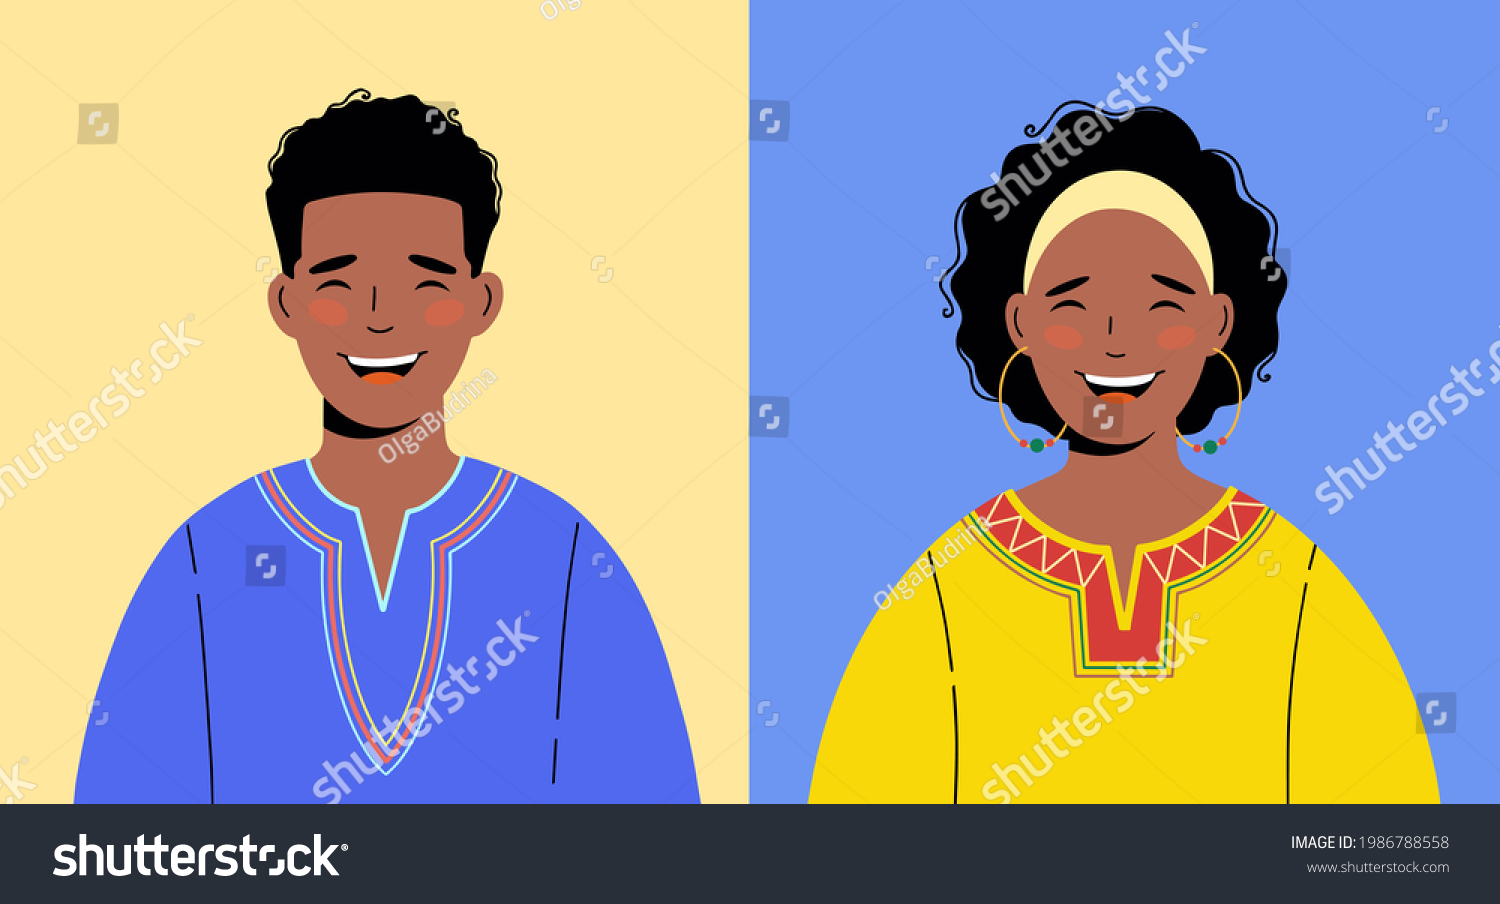 SVG of African-Americans in ethnic clothing. Illustration of a black man and woman. Great for avatars. svg